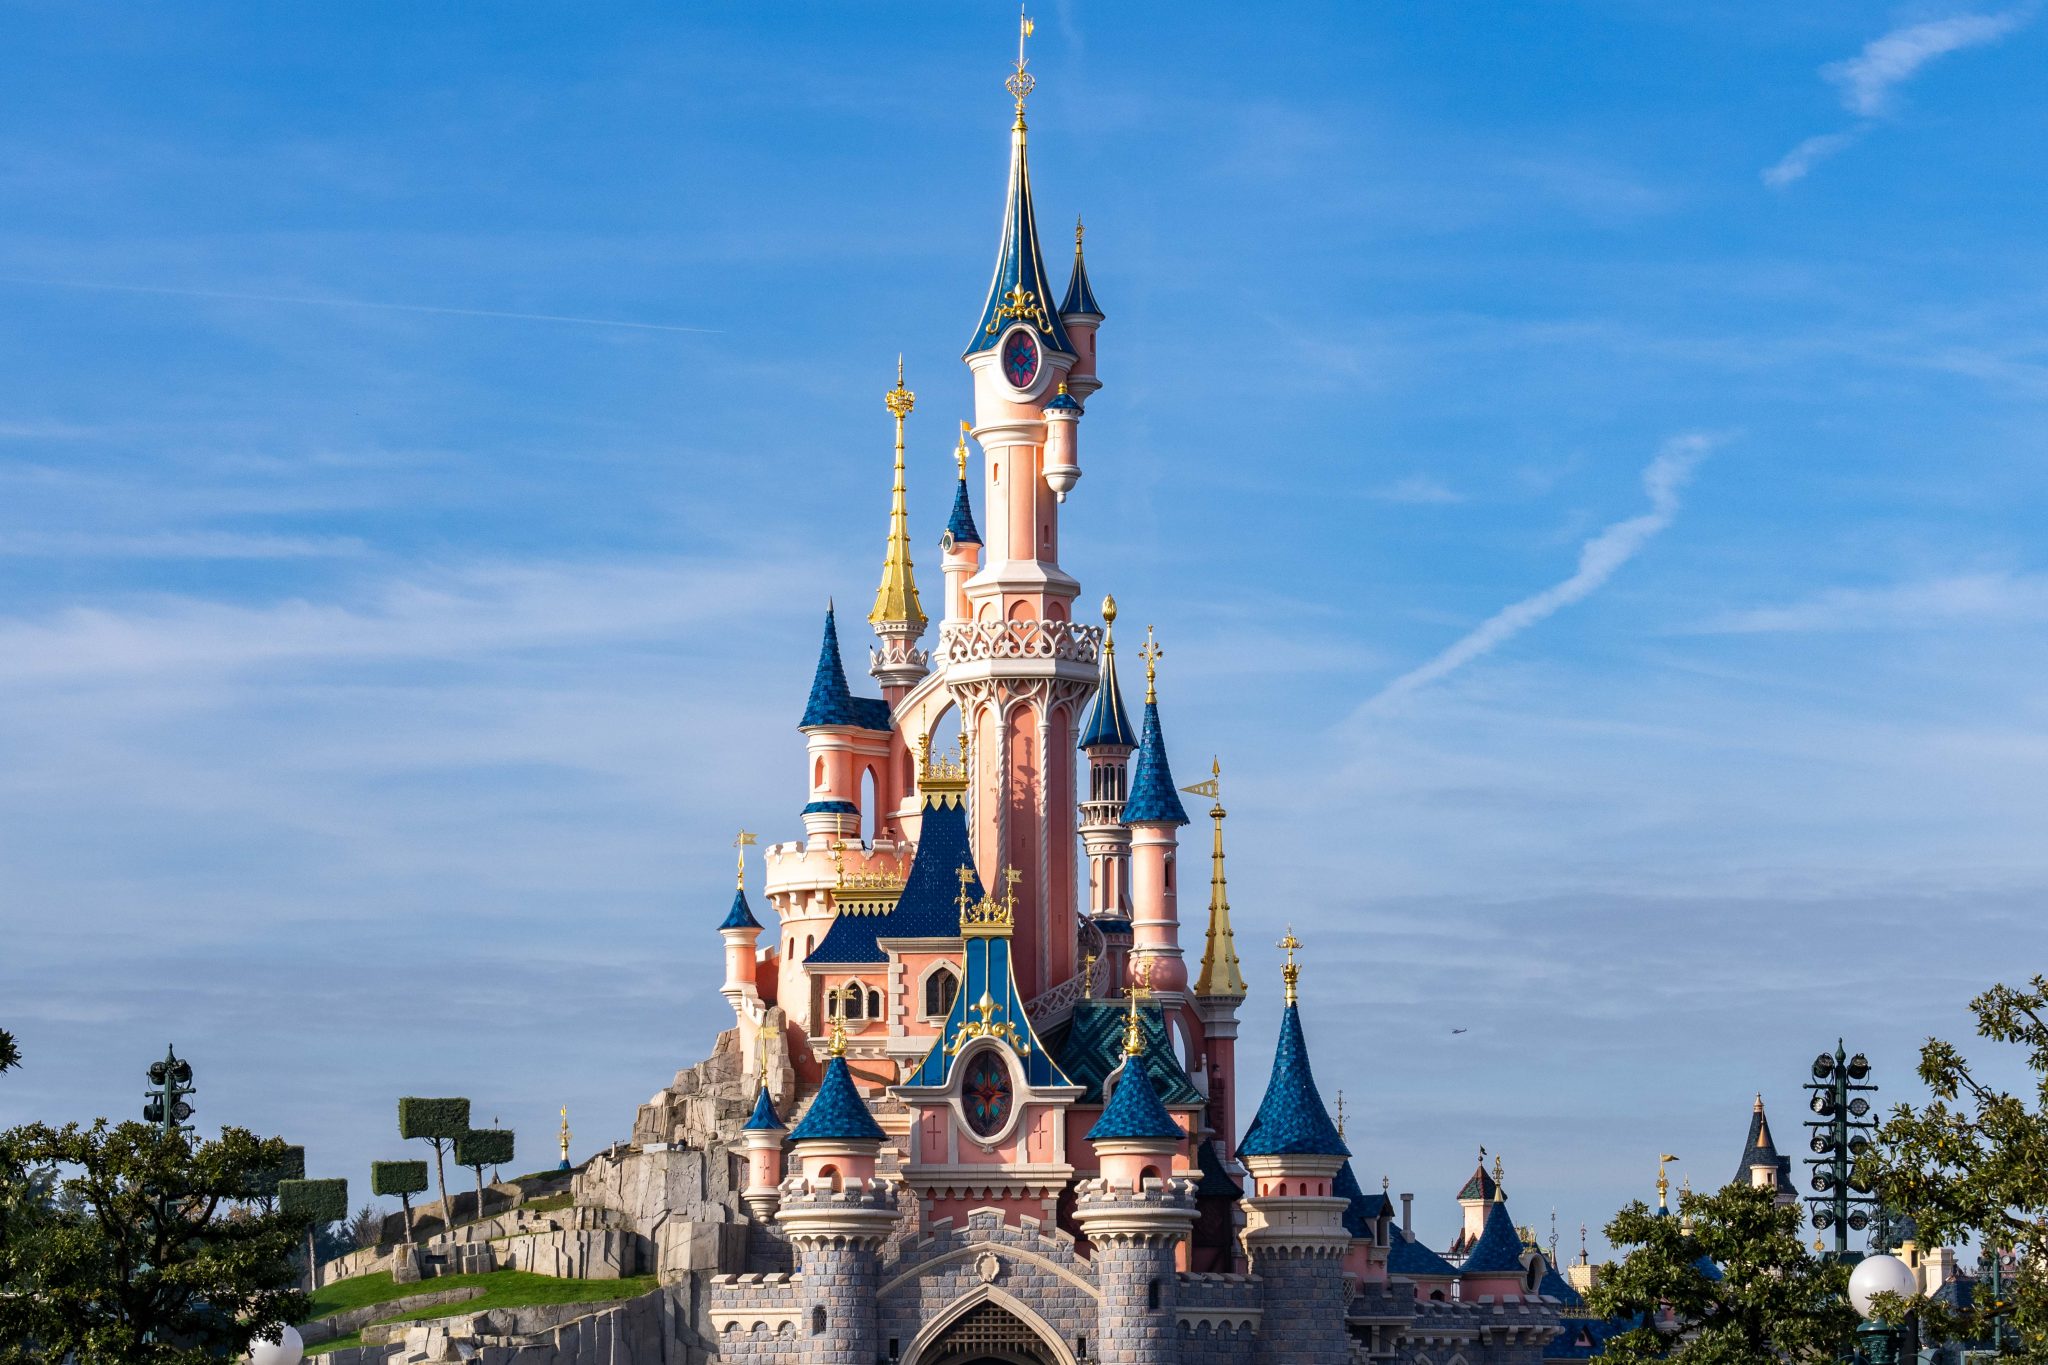 Disneyland Paris Recognized for Excellence in Attractions and Experiences